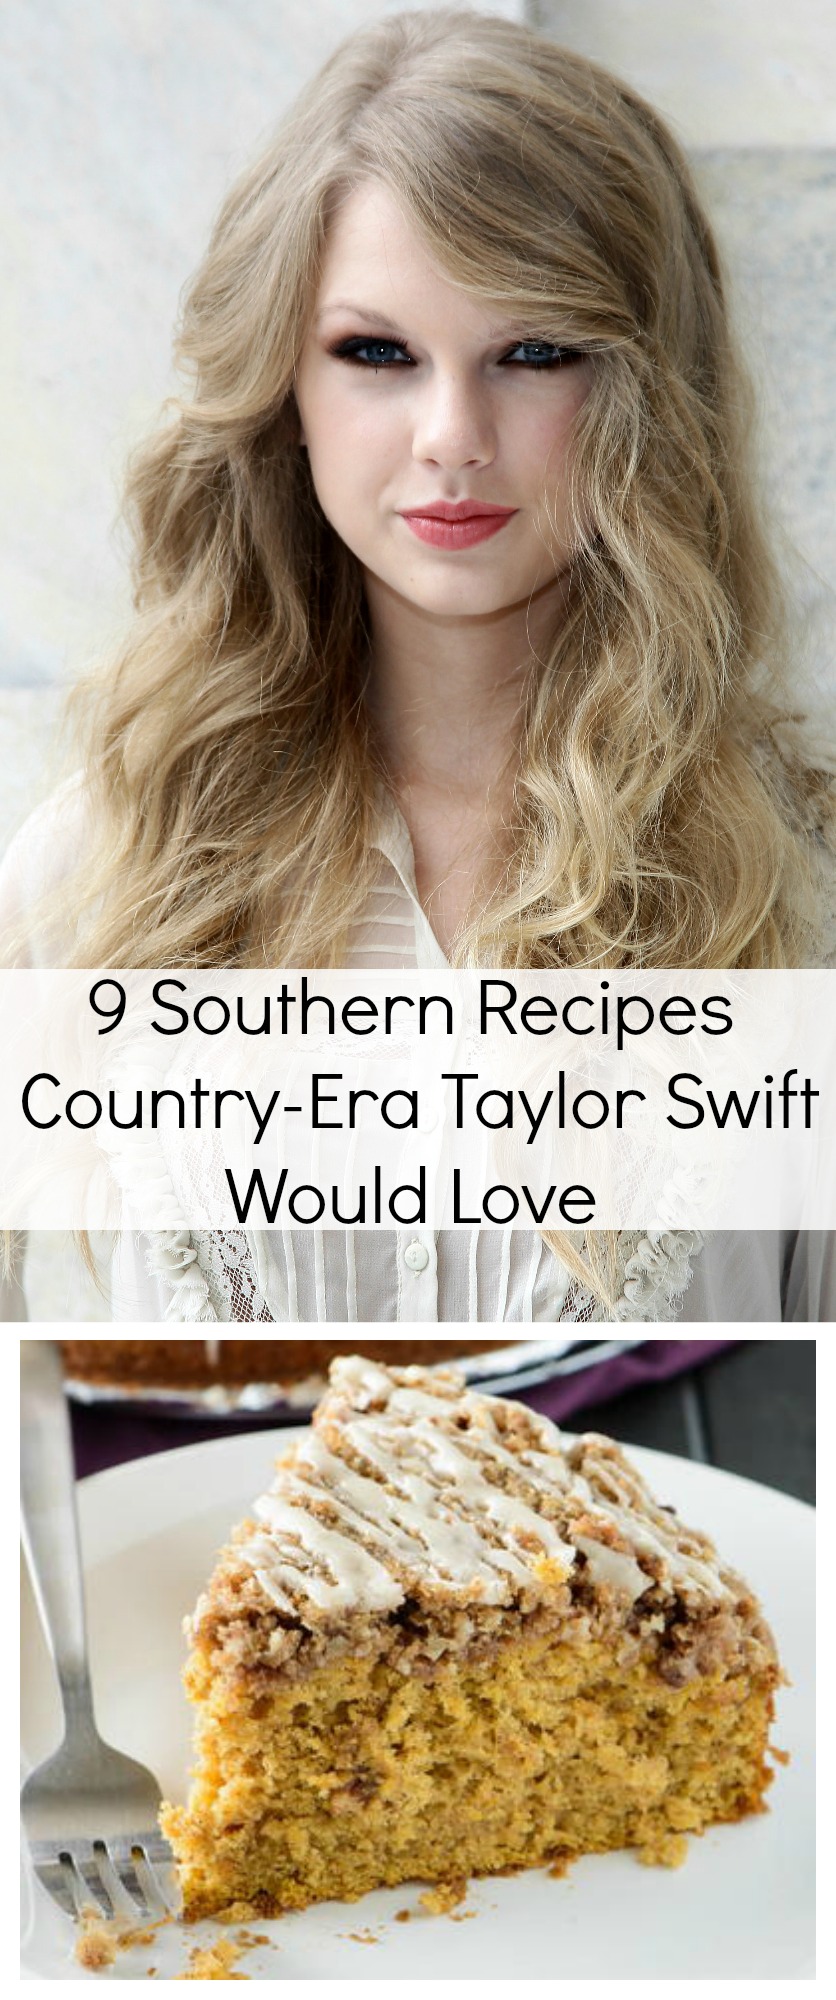 9 Southern Recipes Country-Era Taylor Swift Would Love